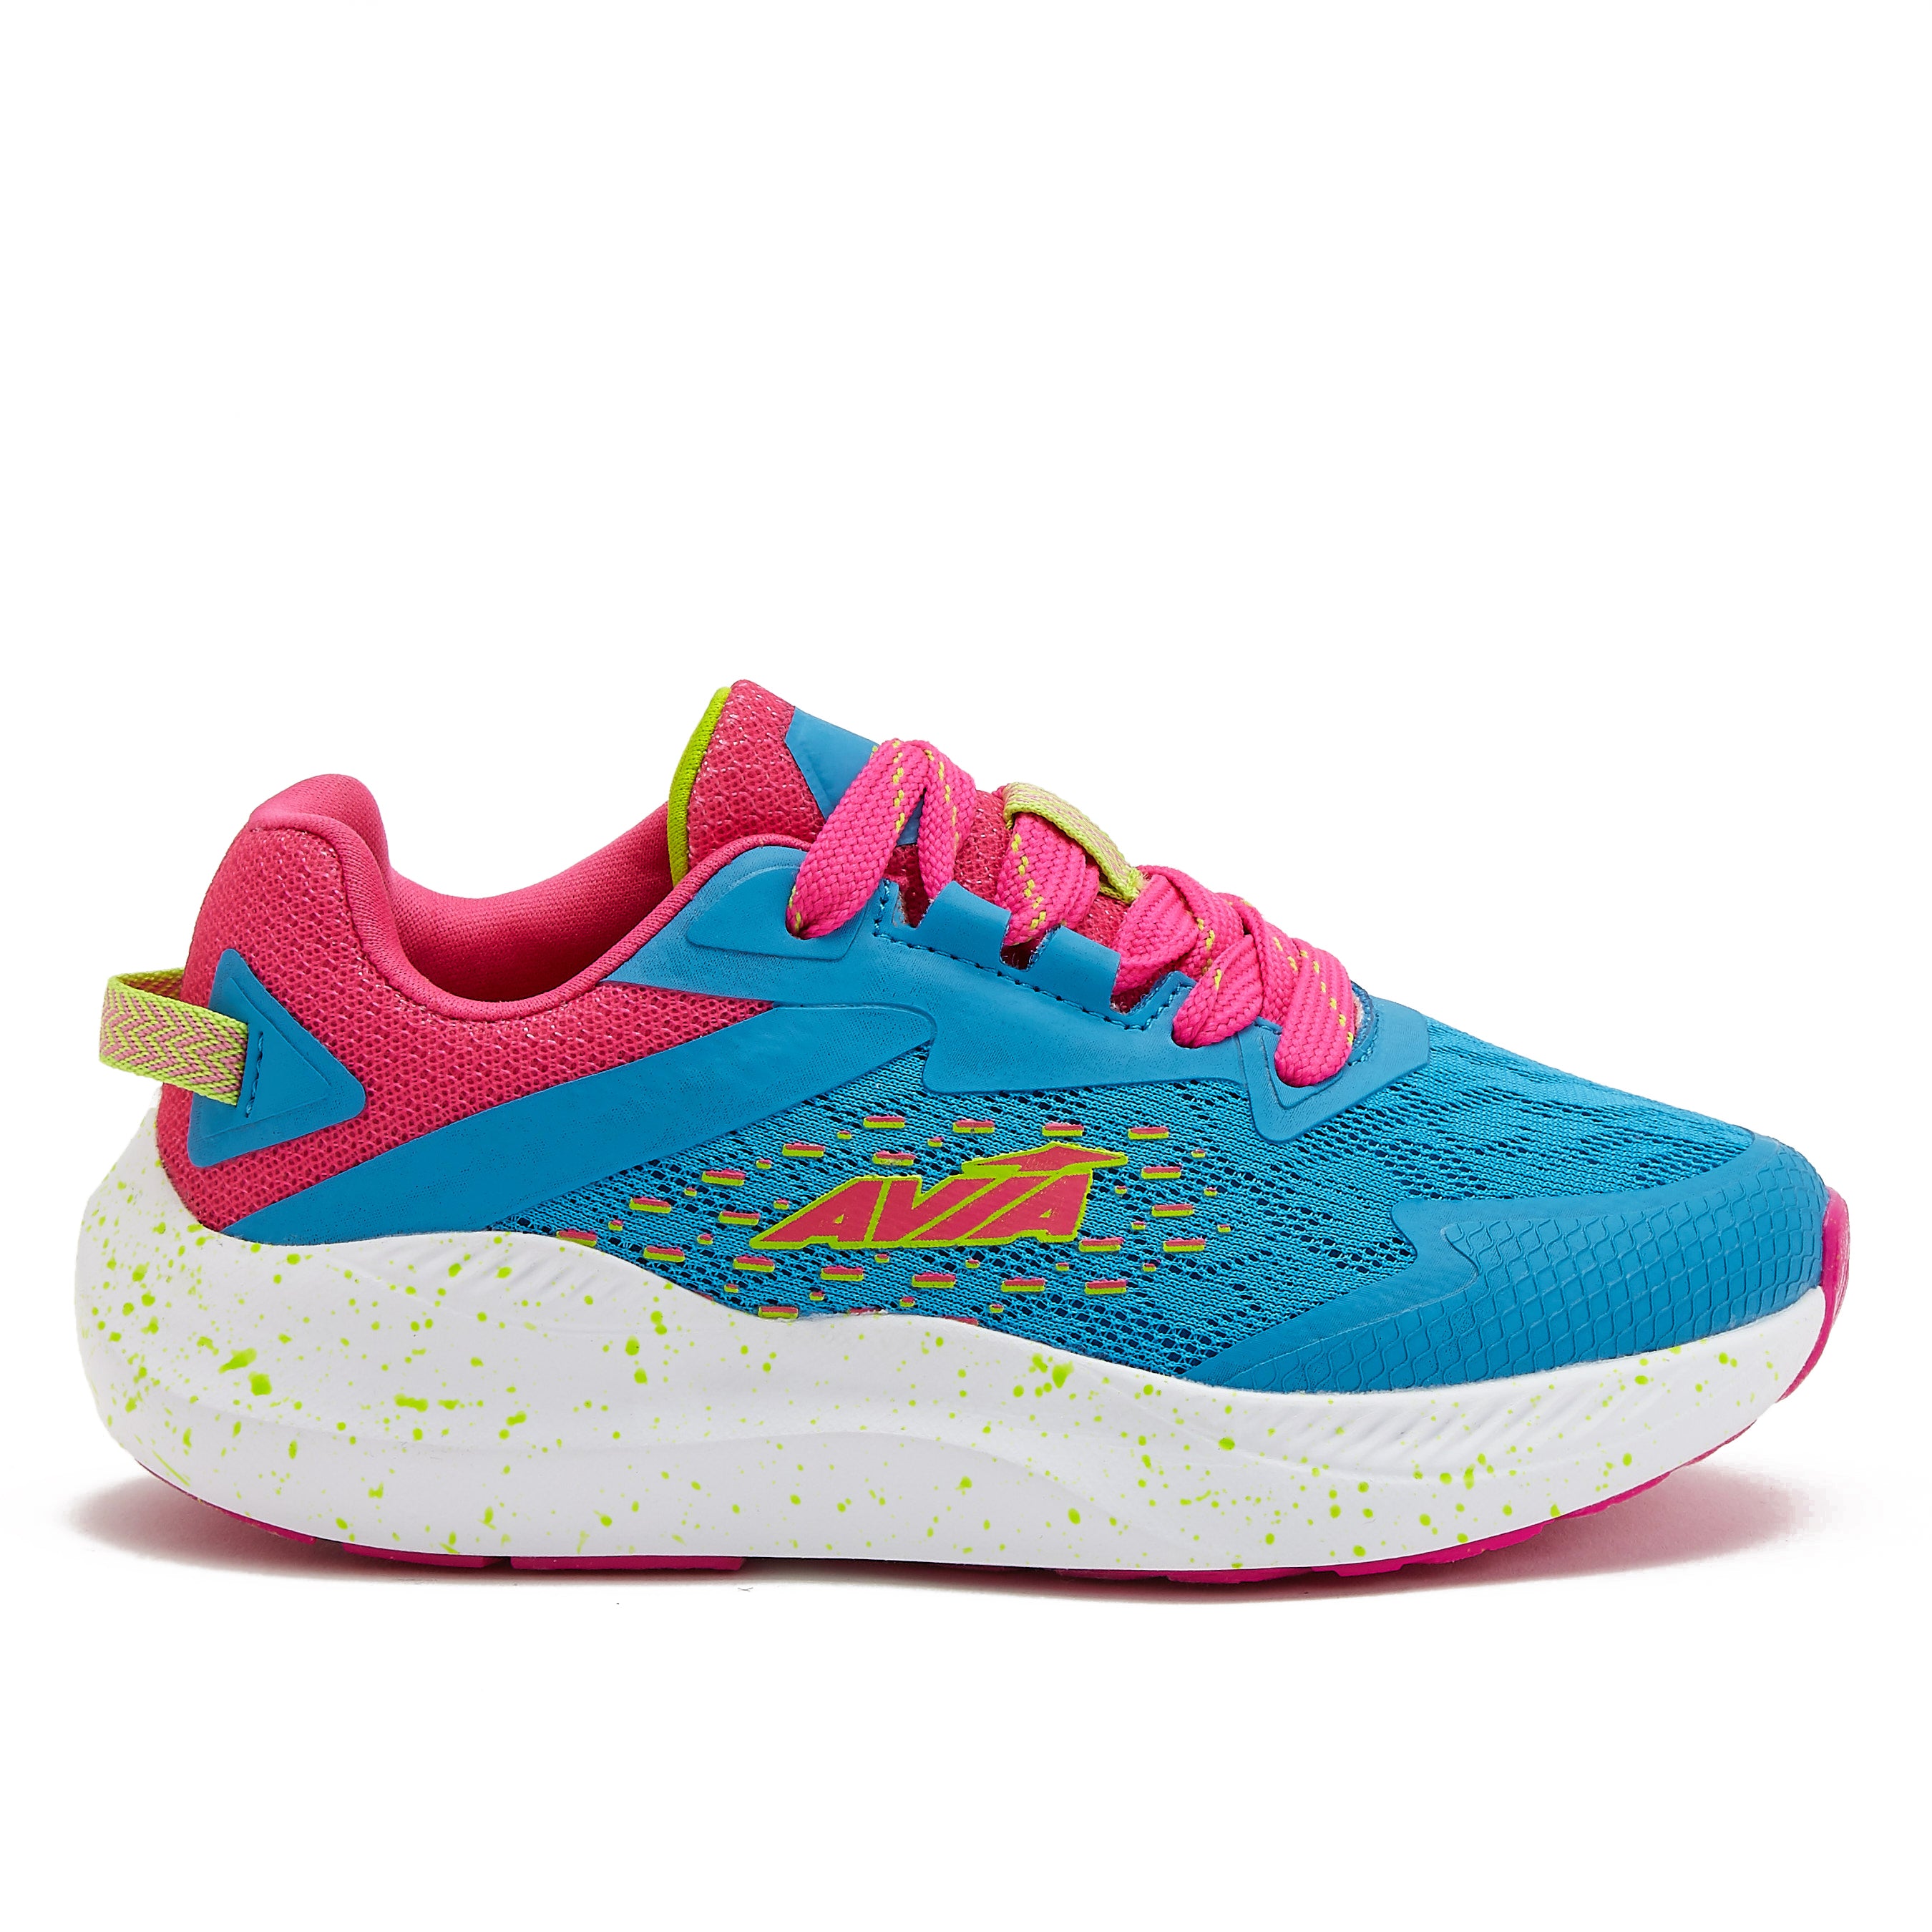 Kid's Sneakers for Girls, Girl's Tennis Shoes